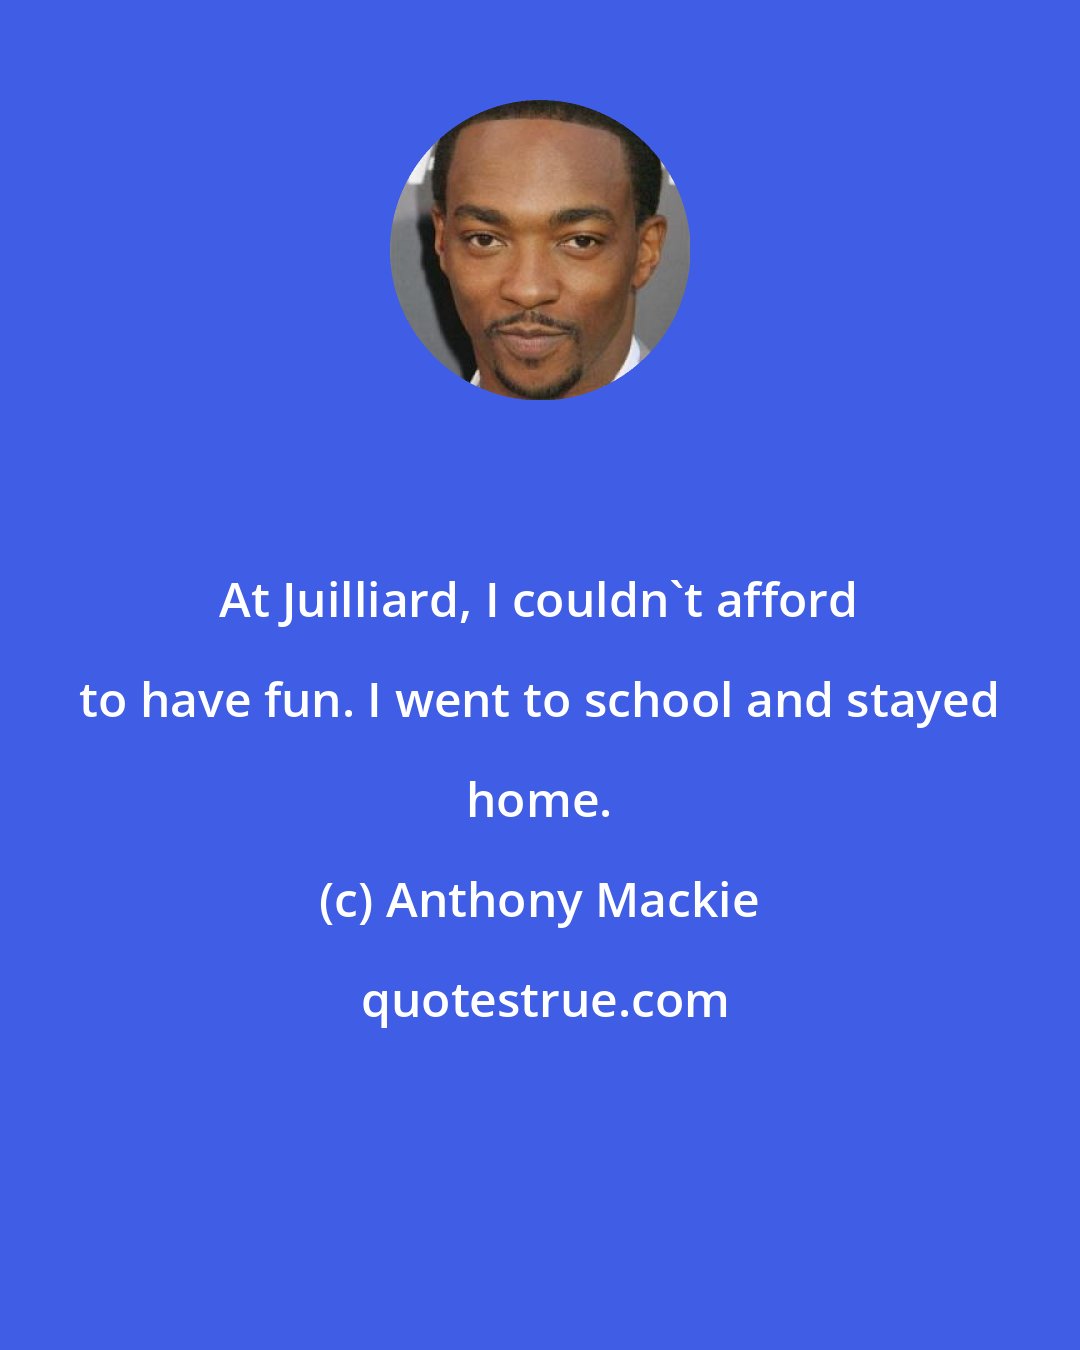 Anthony Mackie: At Juilliard, I couldn't afford to have fun. I went to school and stayed home.